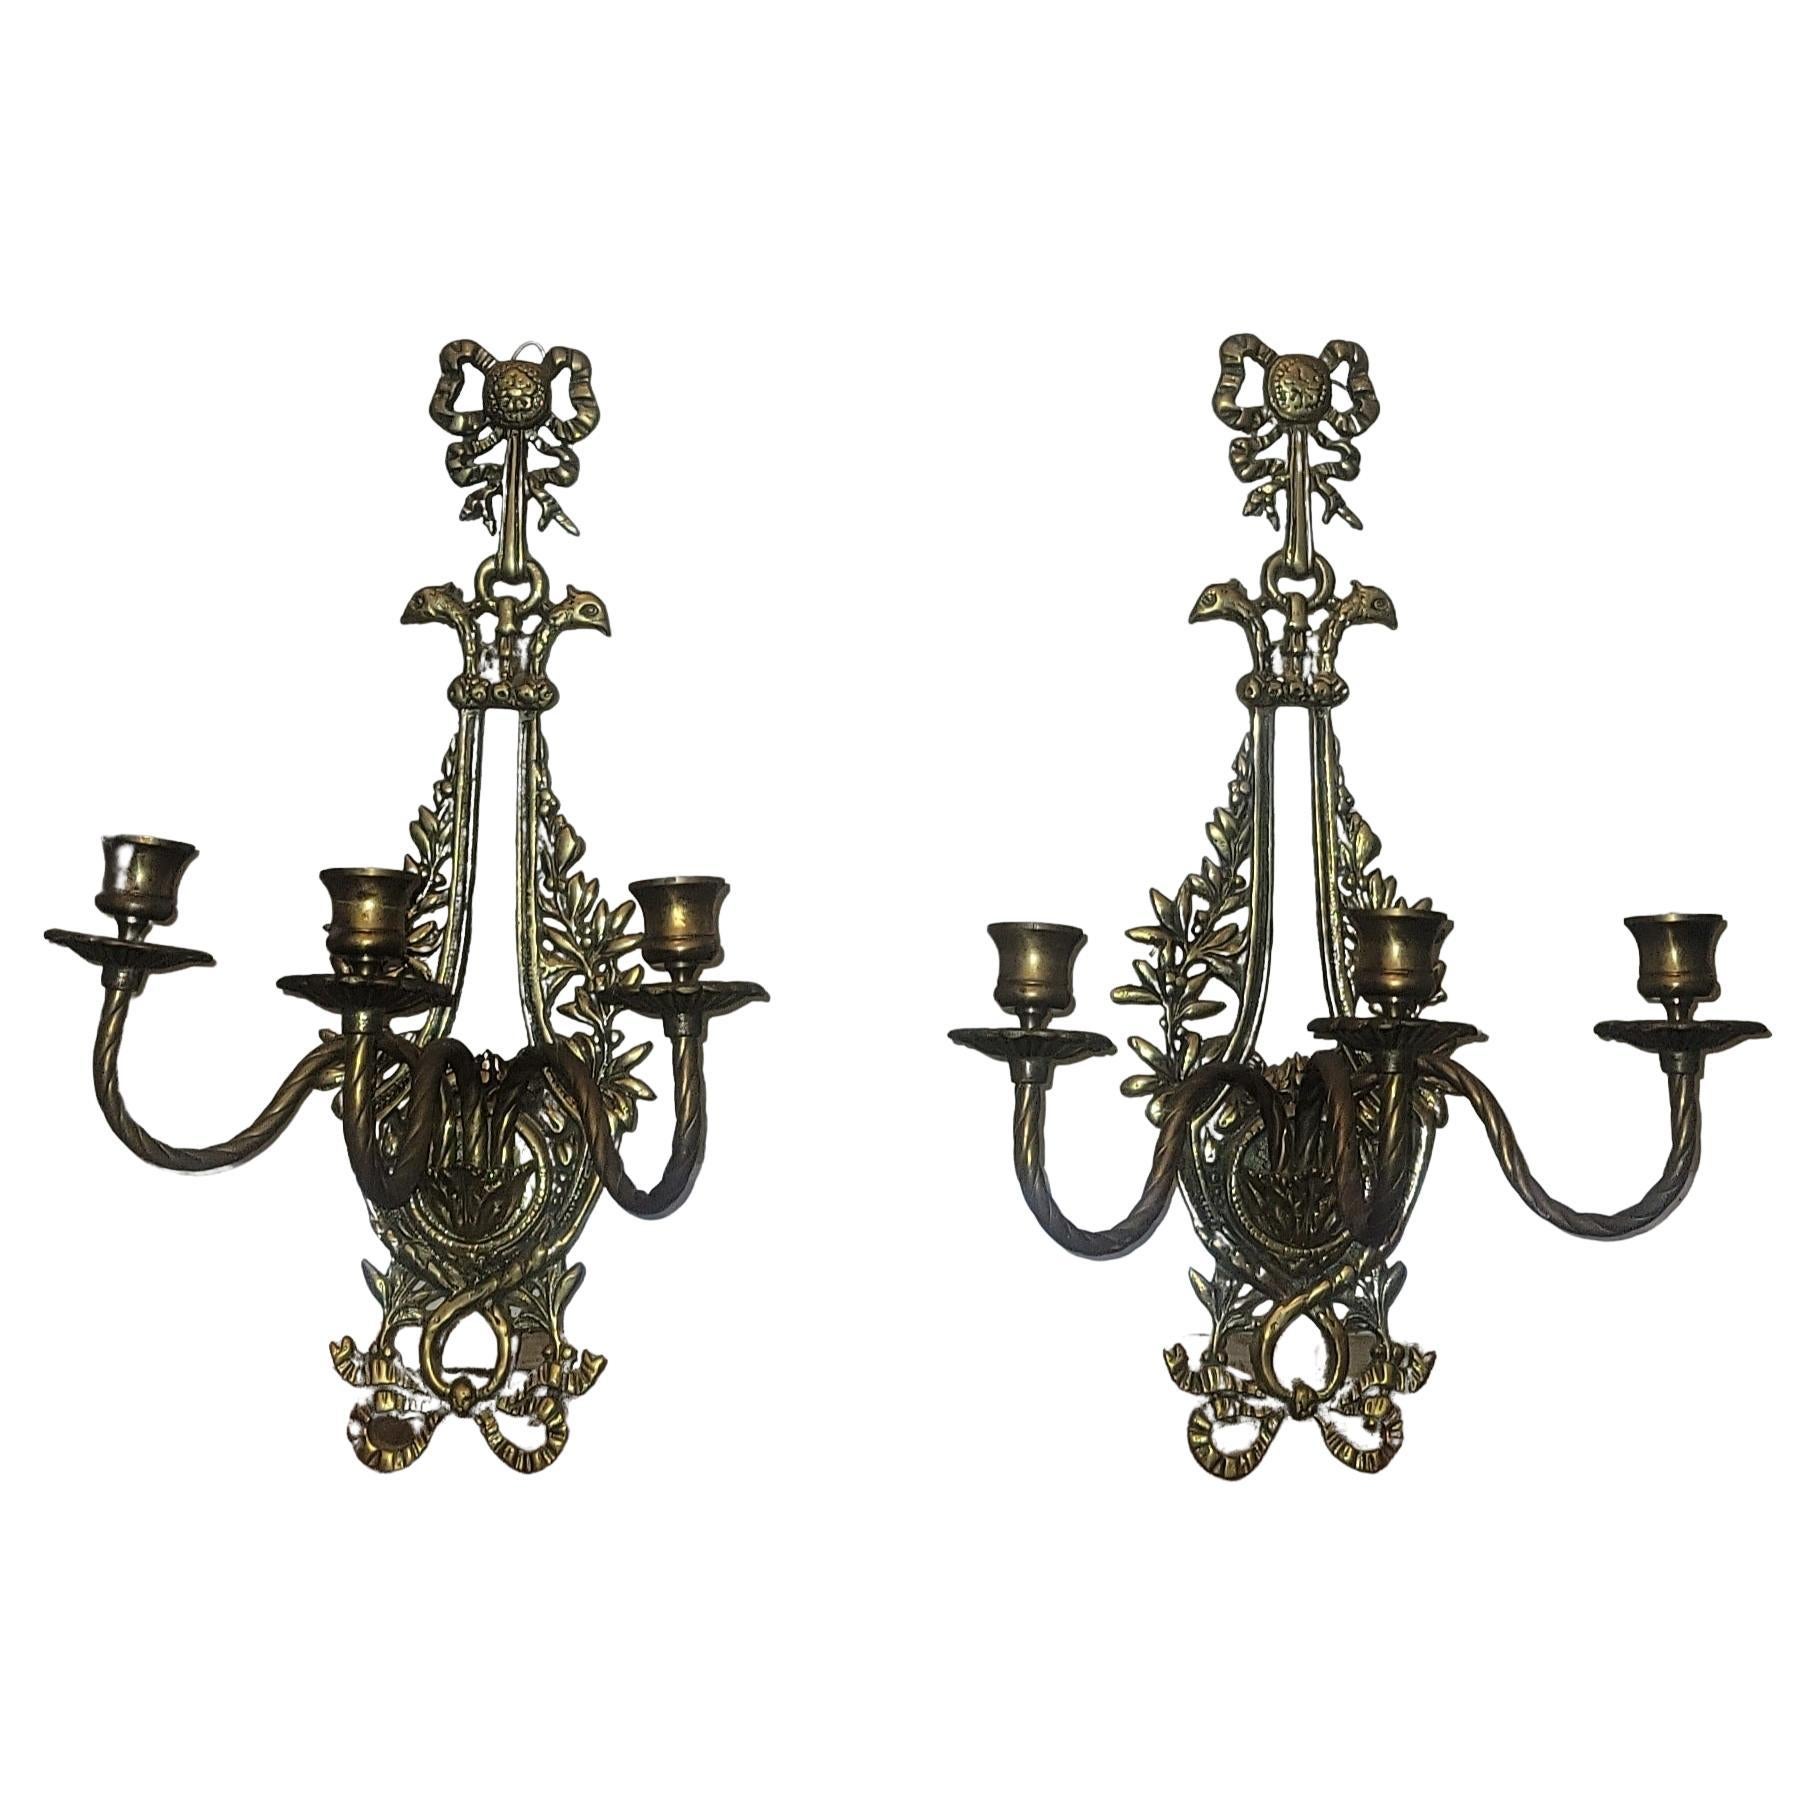 Pair of French Empire Louis XV 3-Arm Bronze Candle Sconces, circa 1910s For Sale 2